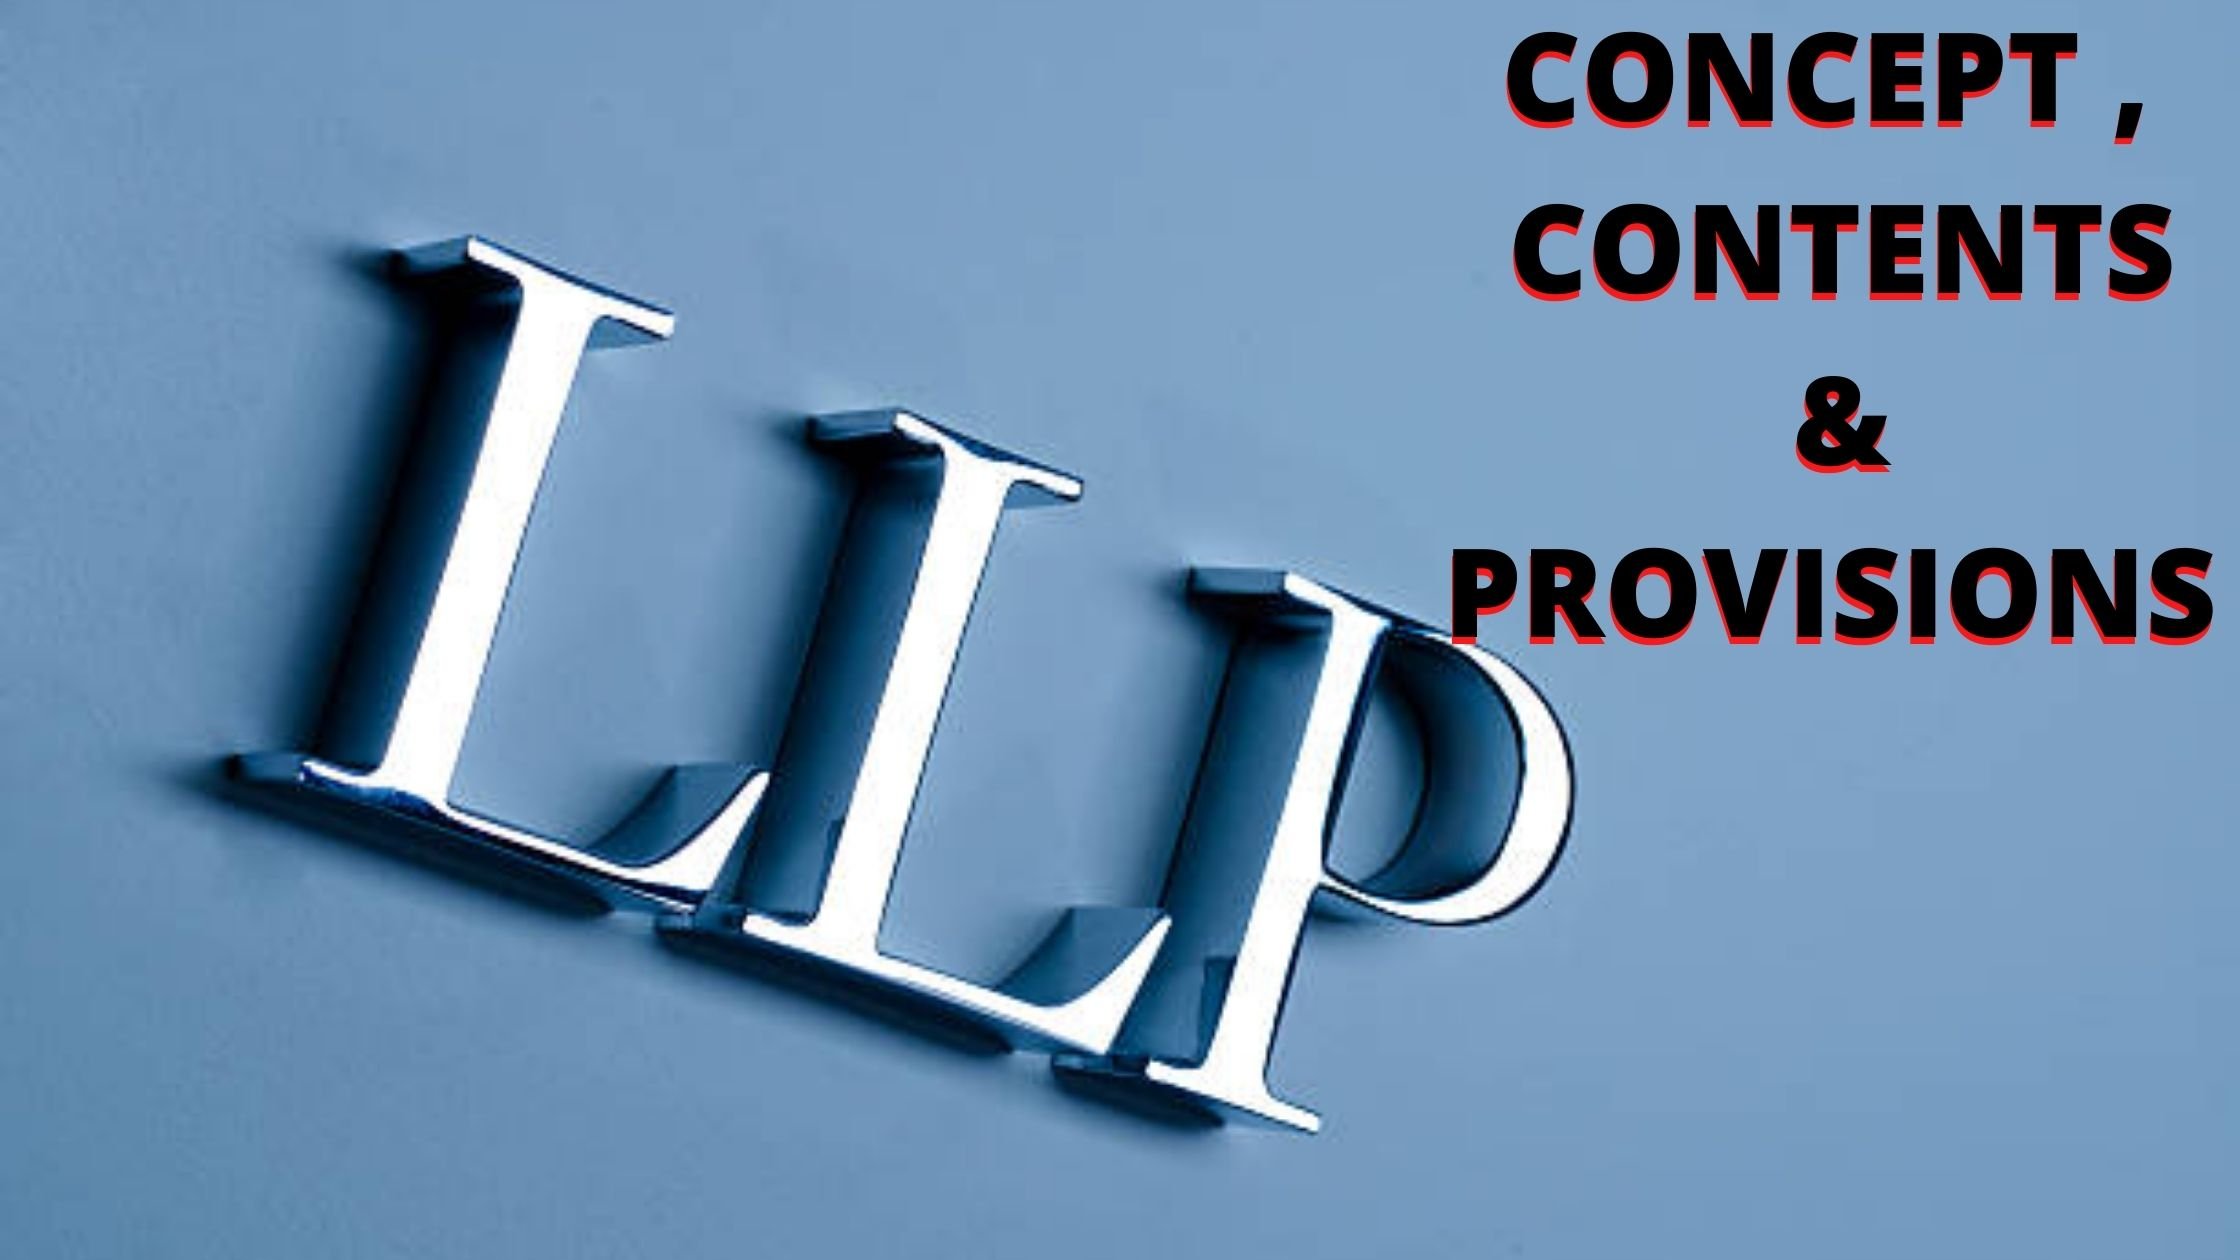 WHAT IS THE LLP? CONTENTS, PROVISIONS AND CONCEPTS